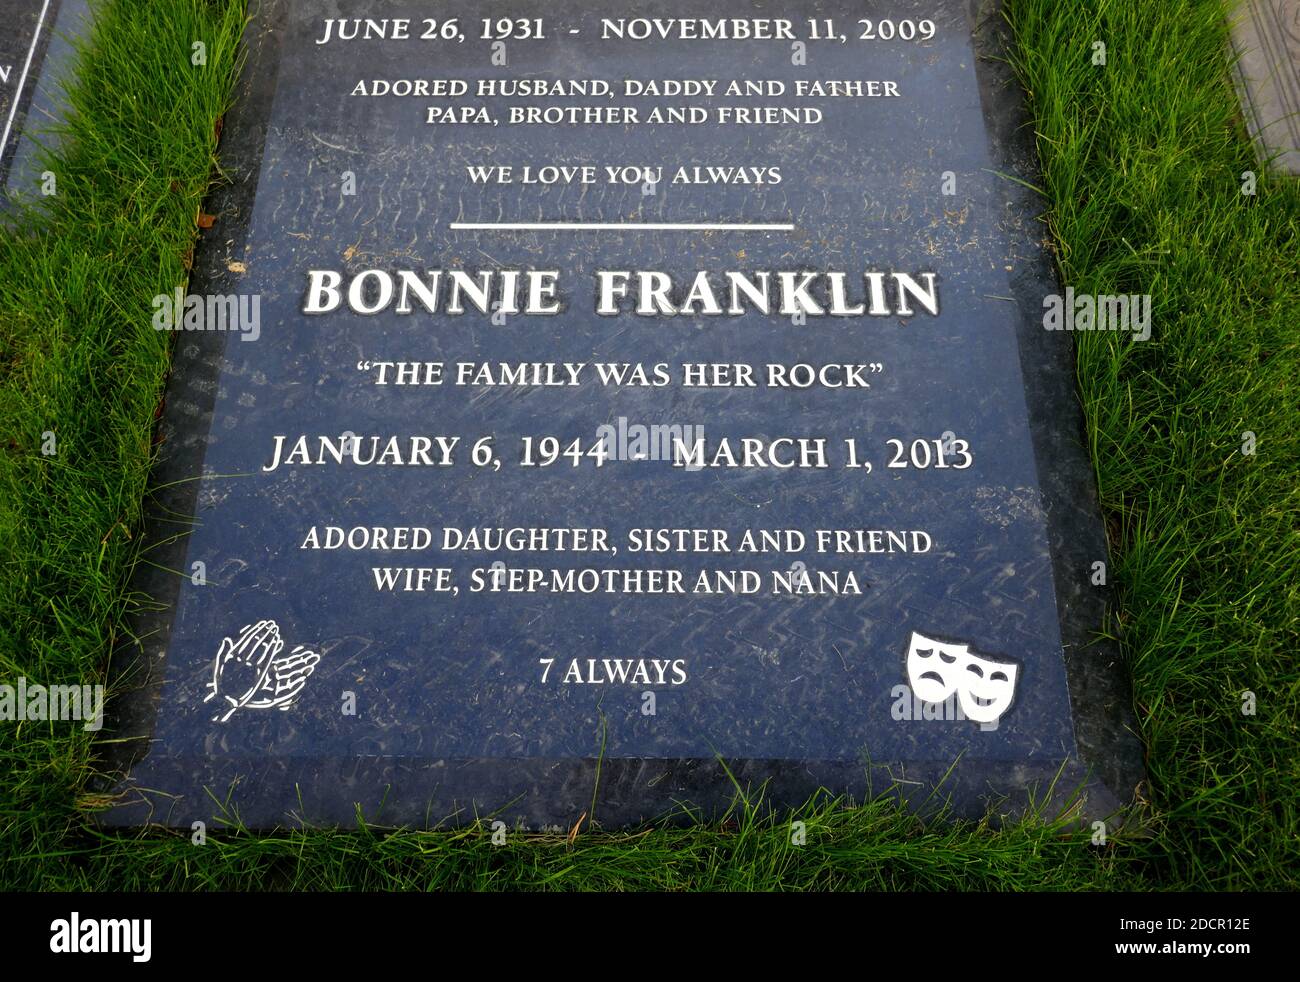 Los Angeles, California, USA 17th November 2020 A general view of atmosphere of actress Bonnie Franklin's Grave at Mount Sinai Cemetery Hollywood Hills on November 17, 2020 in Los Angeles, California, USA. Photo by Barry King/Alamy Stock Photo Stock Photo